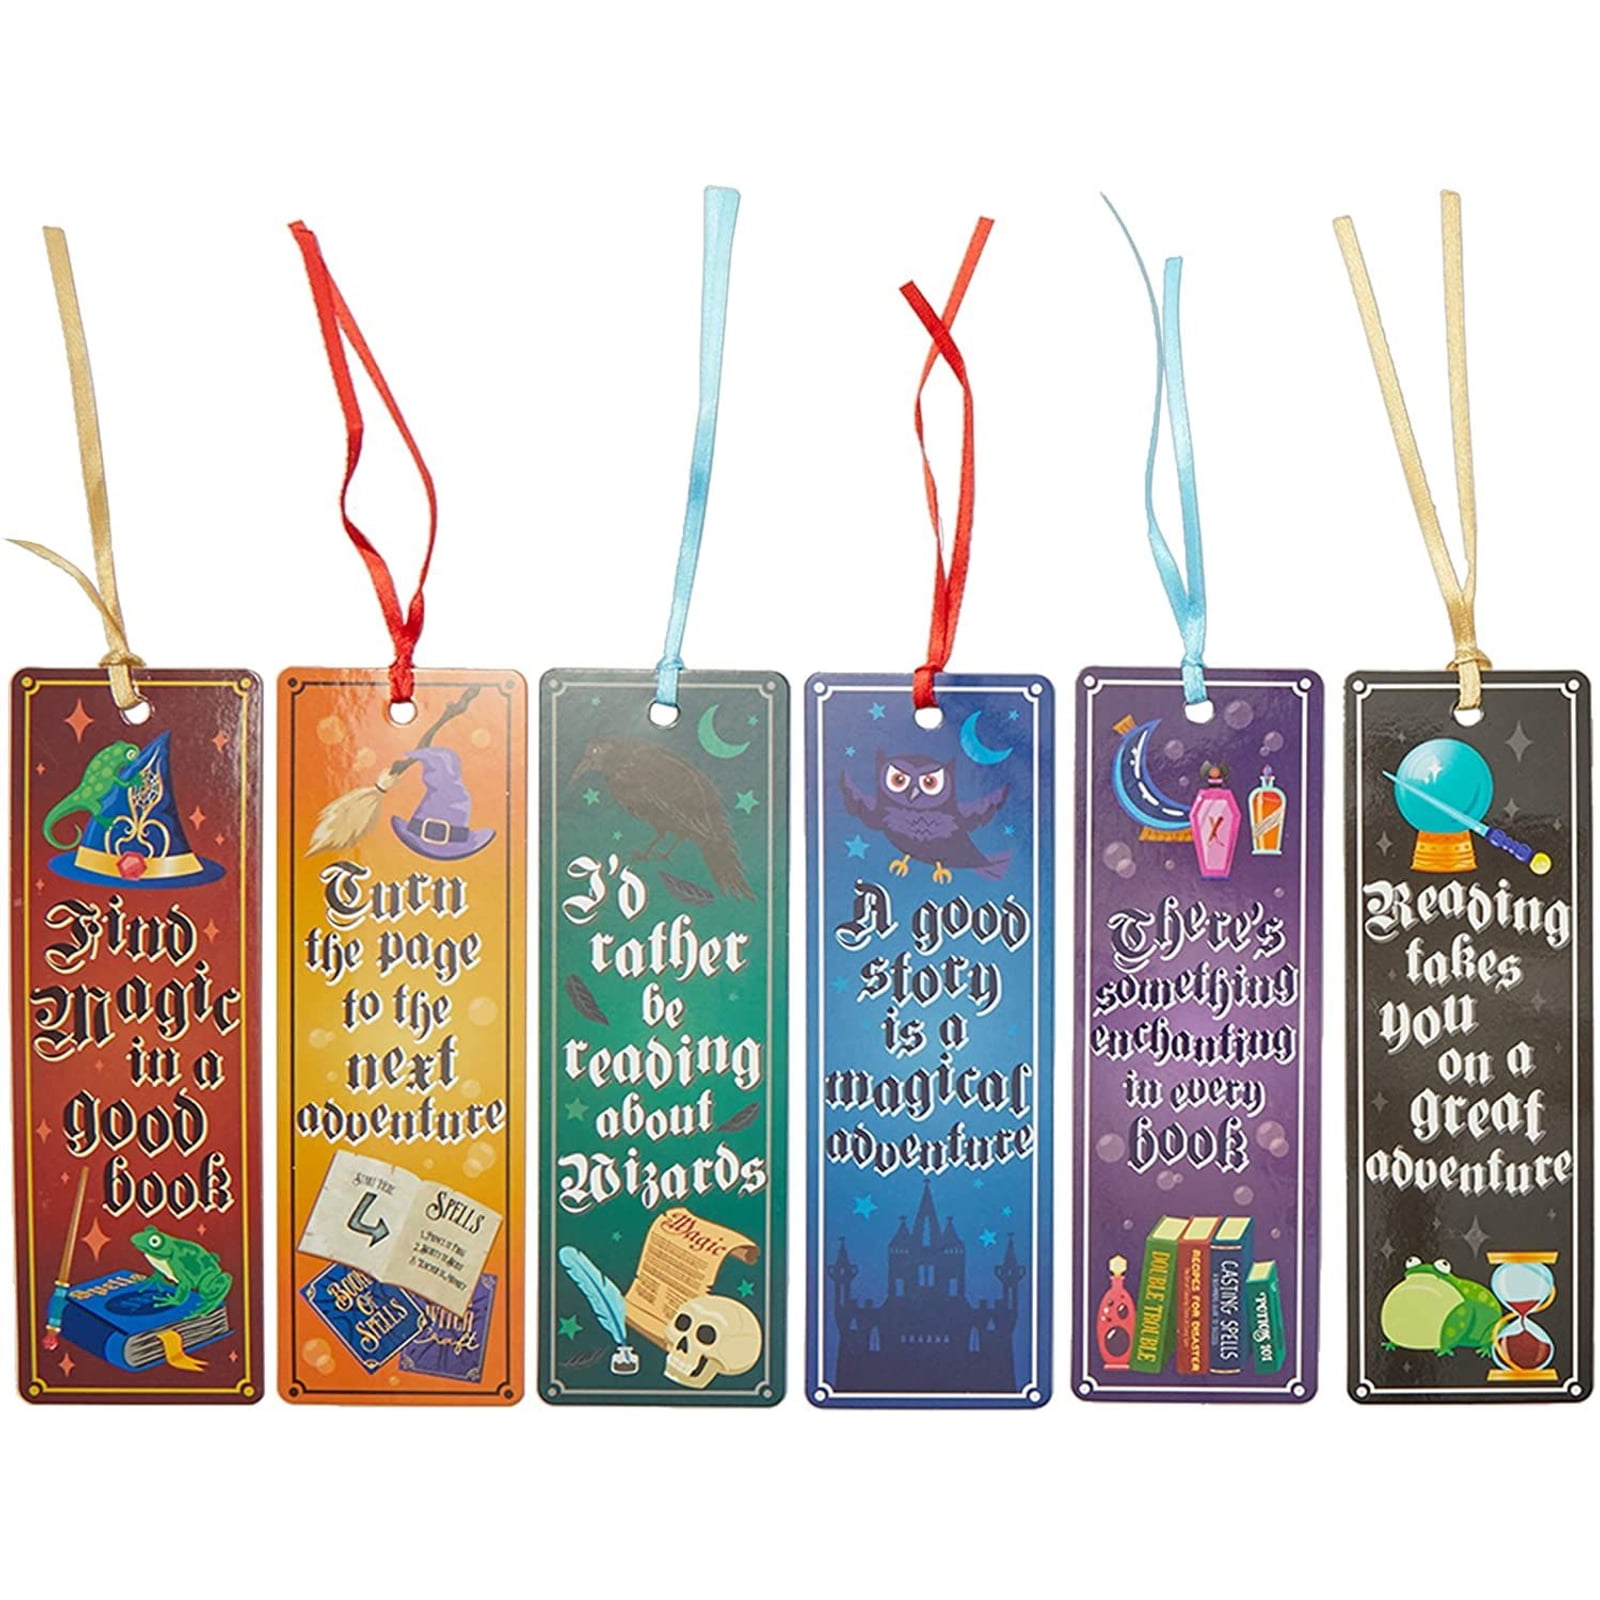 DISNEY BOOKMARK LOT OF 24 ASSORTED BOOKMARKS 3-6 INCHES 